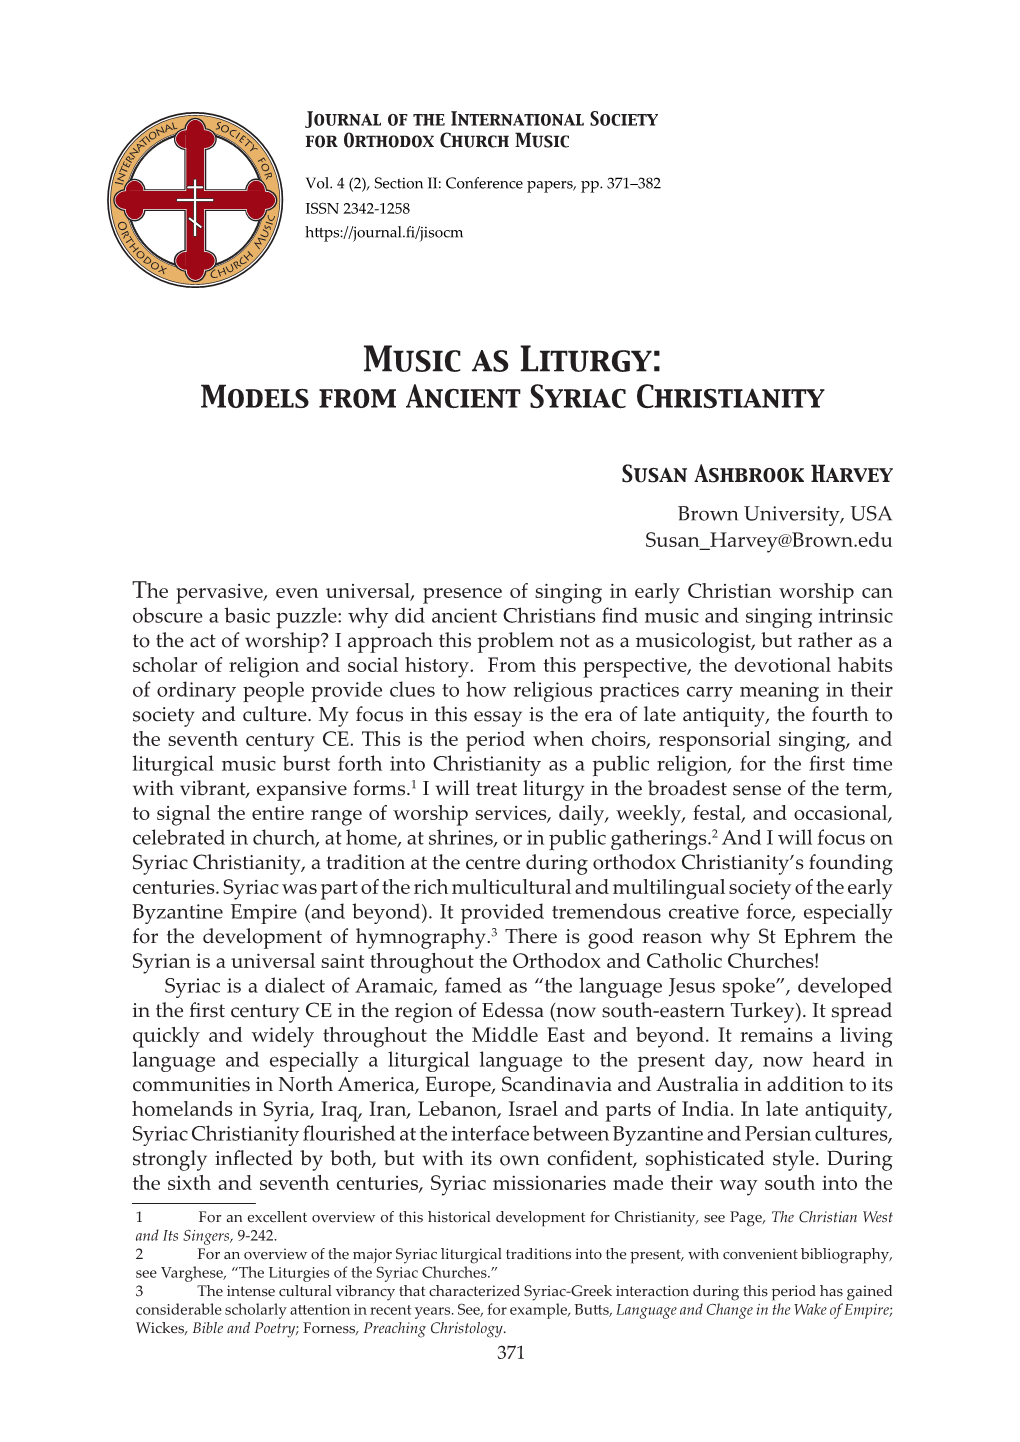 Music As Liturgy: Models from Ancient Syriac Christianity